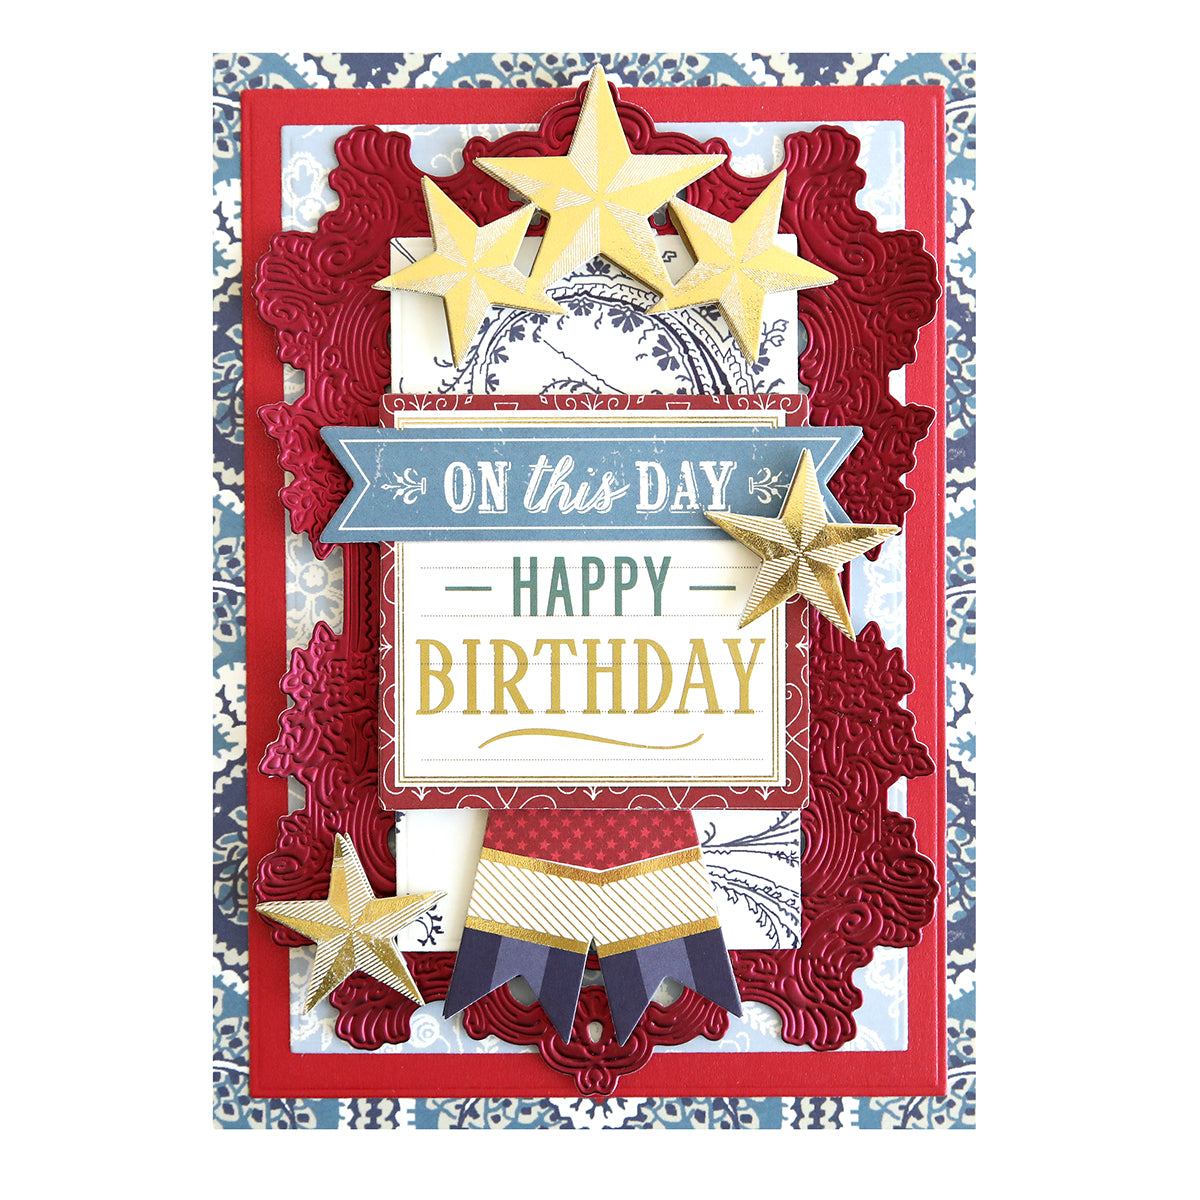 Handmade birthday card with ornate layers, featuring a central "happy birthday" message, decorative patterns, stars, and Birthday Sentiment Rub Ons.